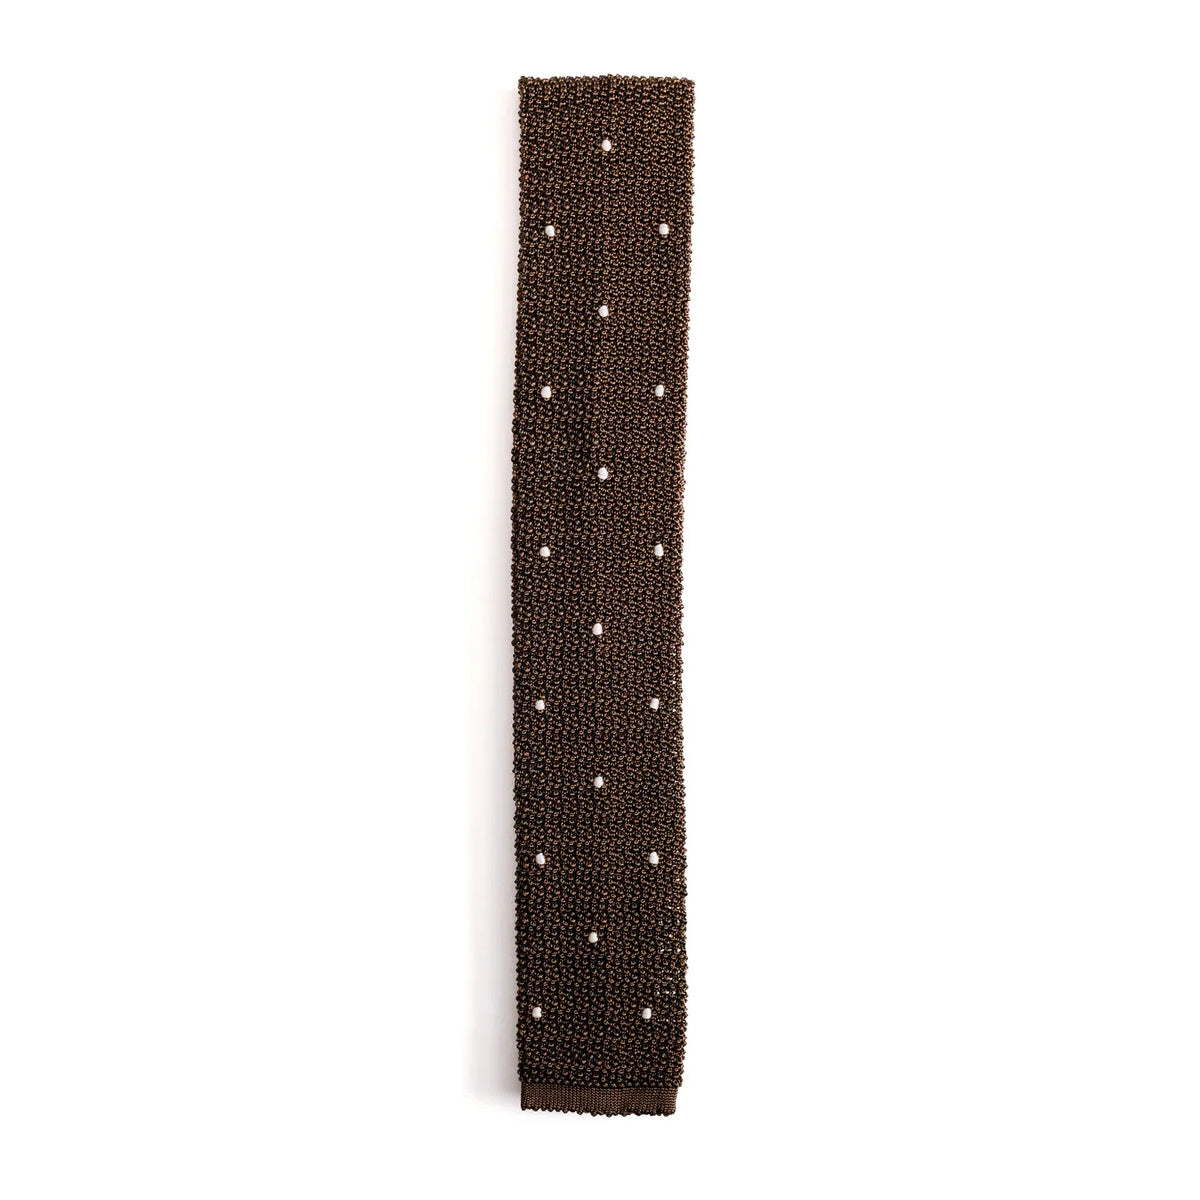 Chocolate & White Spot Knitted Tie